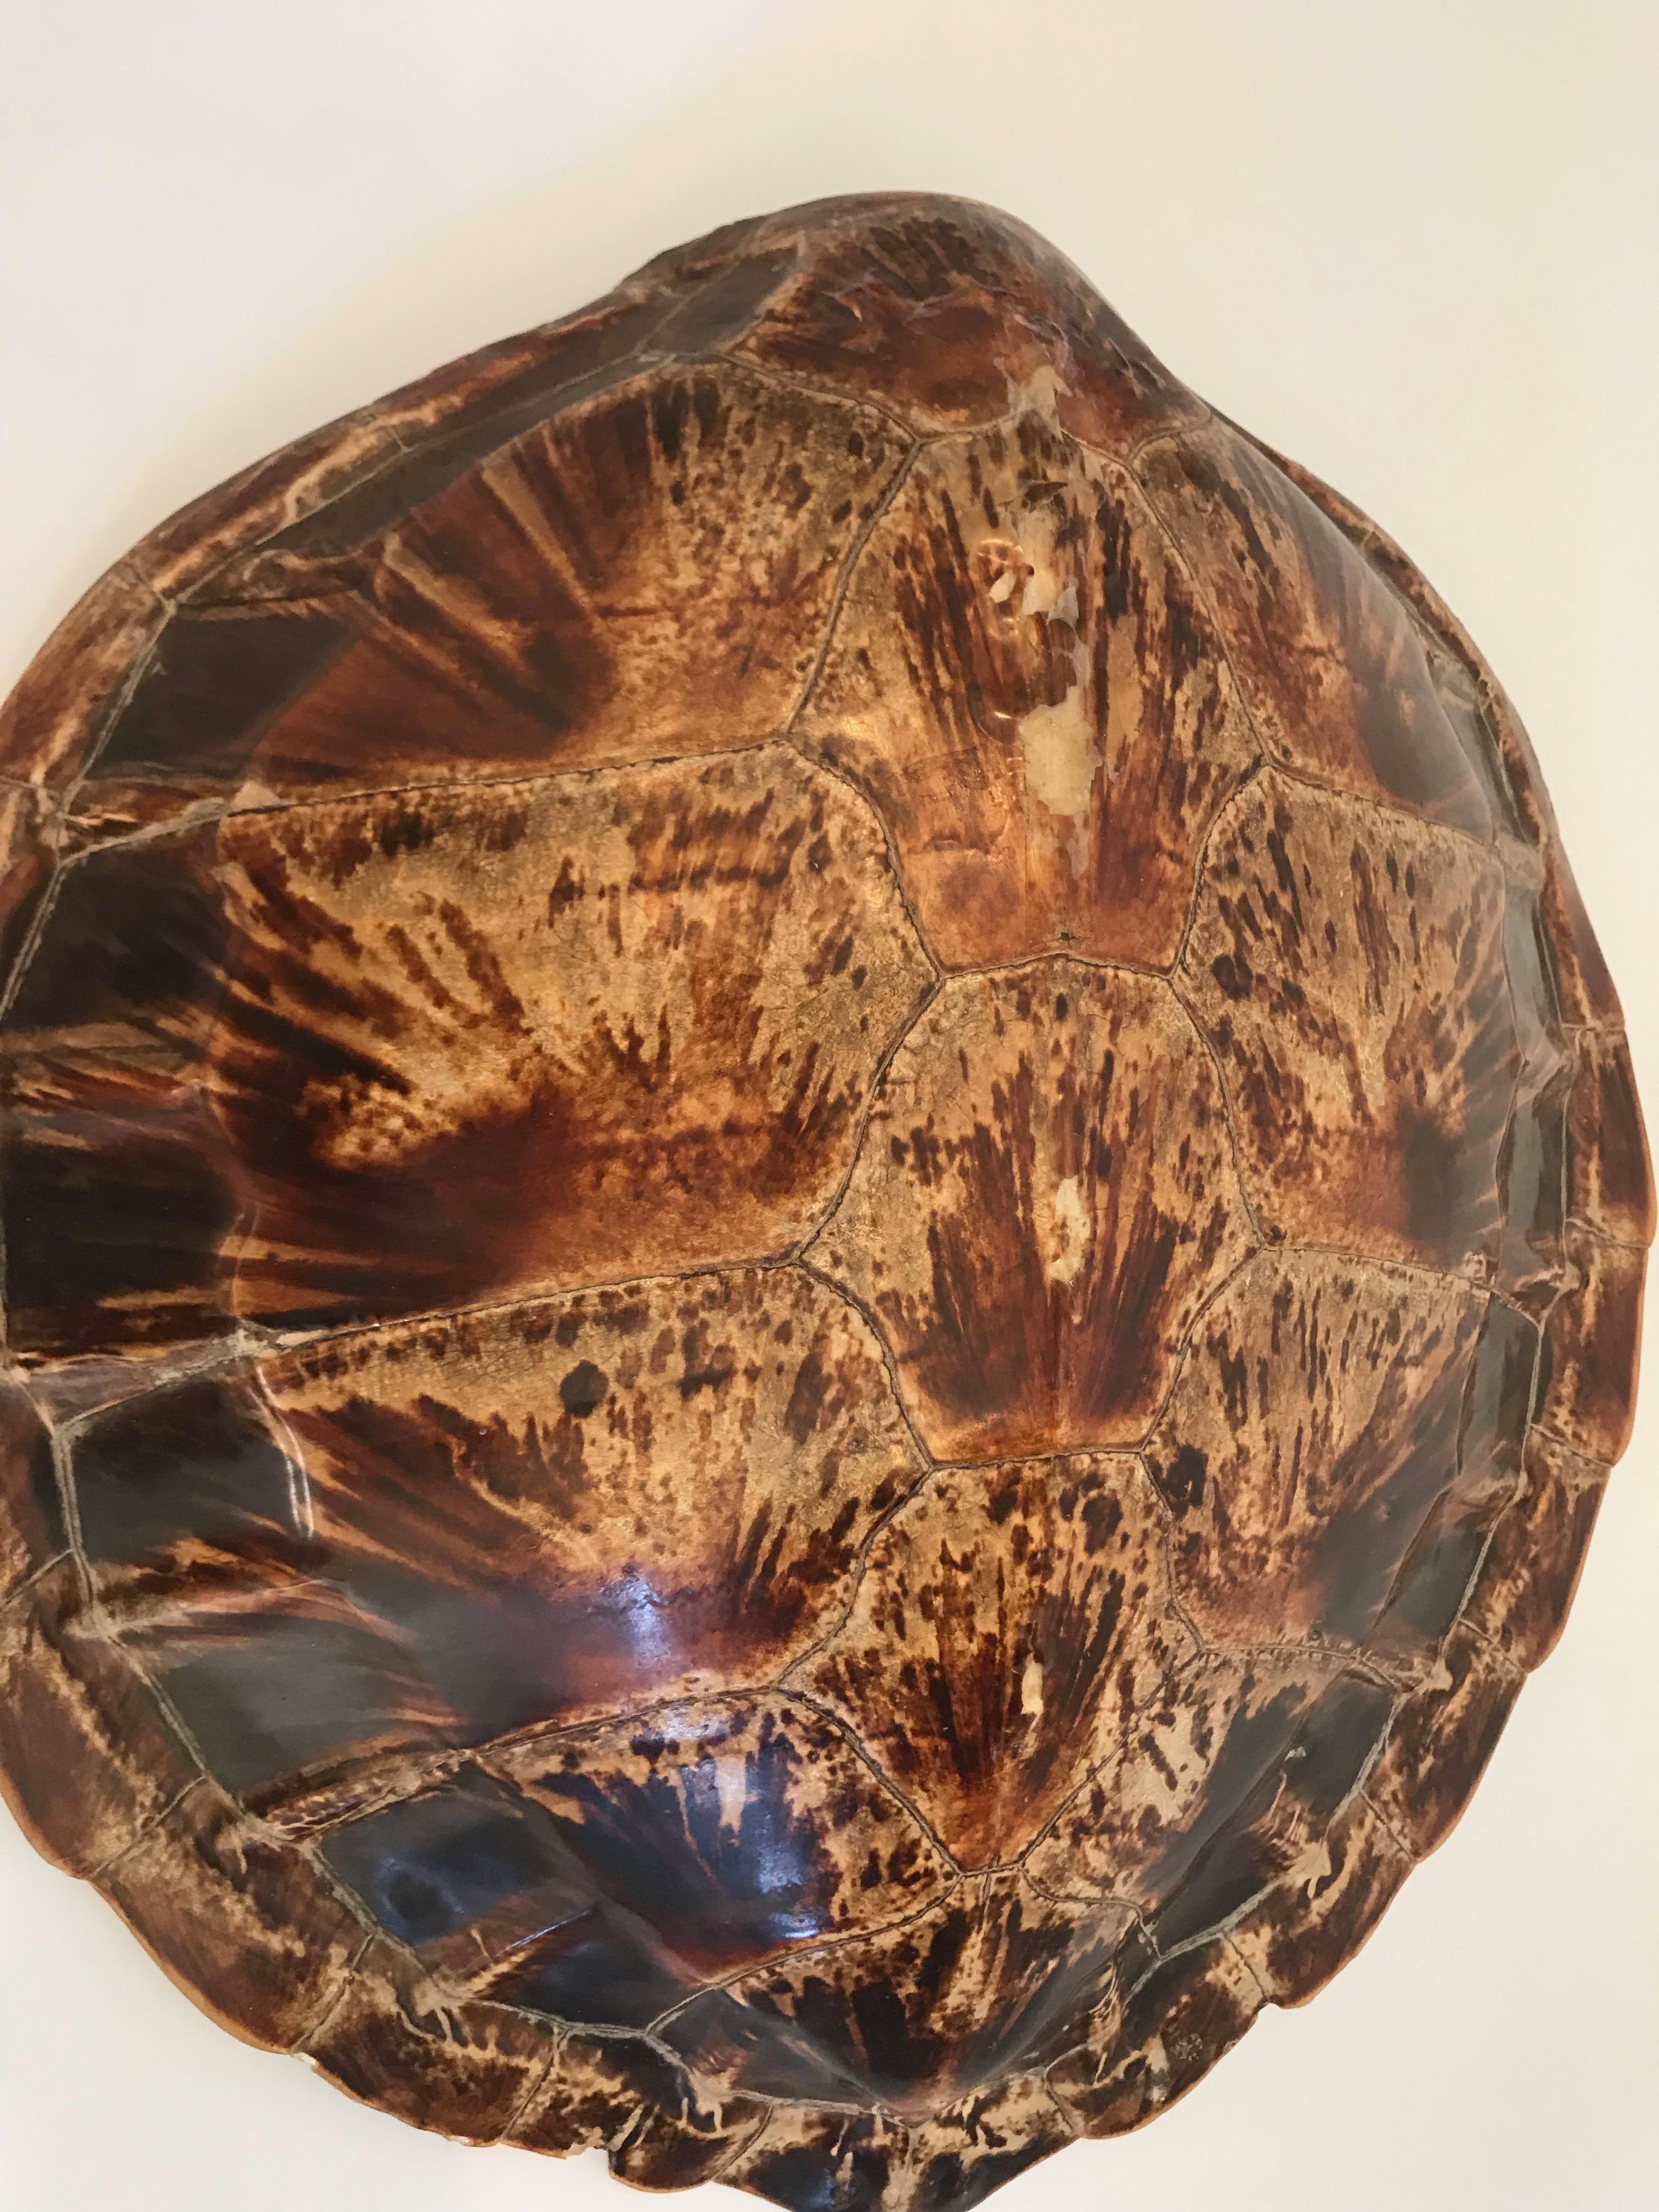 An excellent large brown tortoise shell that can be mounted on the wall.